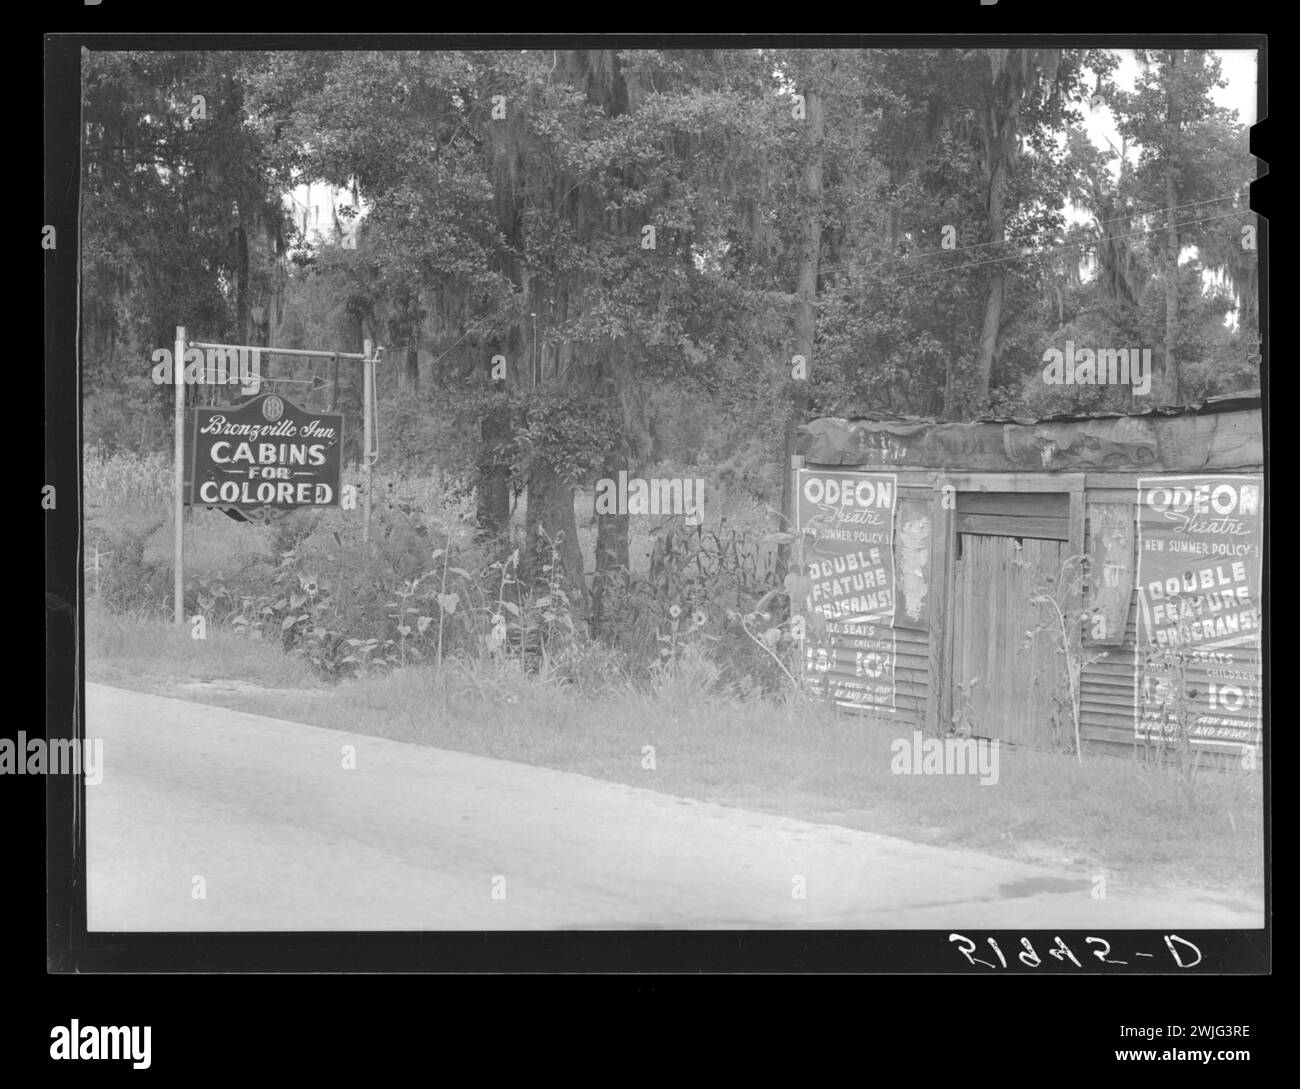 Highway sign advertising Bronzville Inn, segregated roadside tourist cabins, South Carolina, 6/1939. (Photo by Marion Post Wolcott/U S Farm Security Administration/OWI) Stock Photo